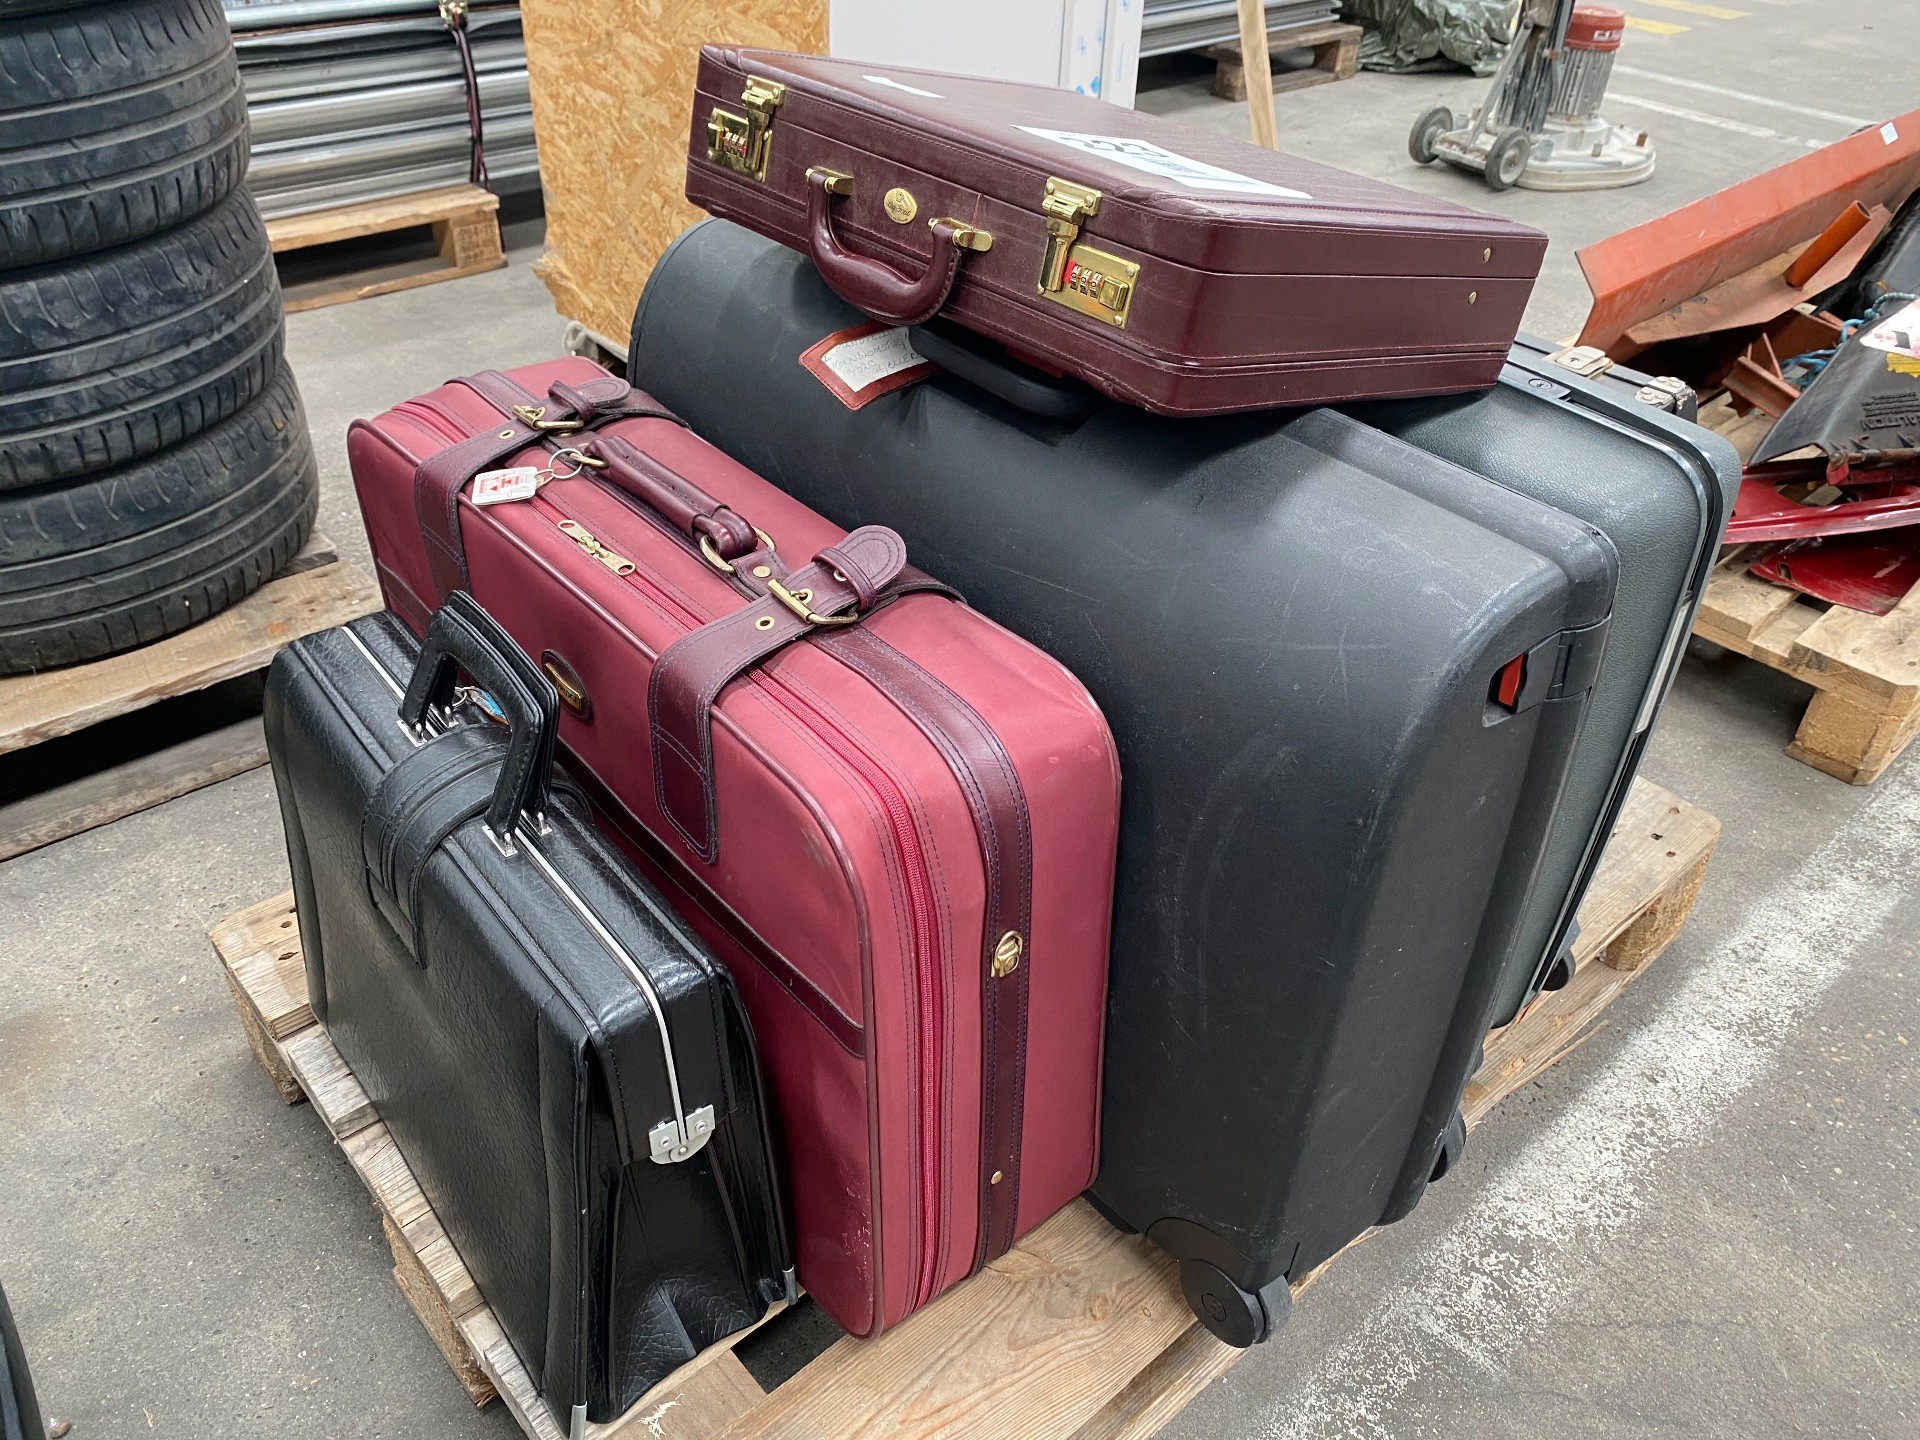 intelligens Editor sidde Lot of suitcases / bags - KJ Auktion - Machine auctions